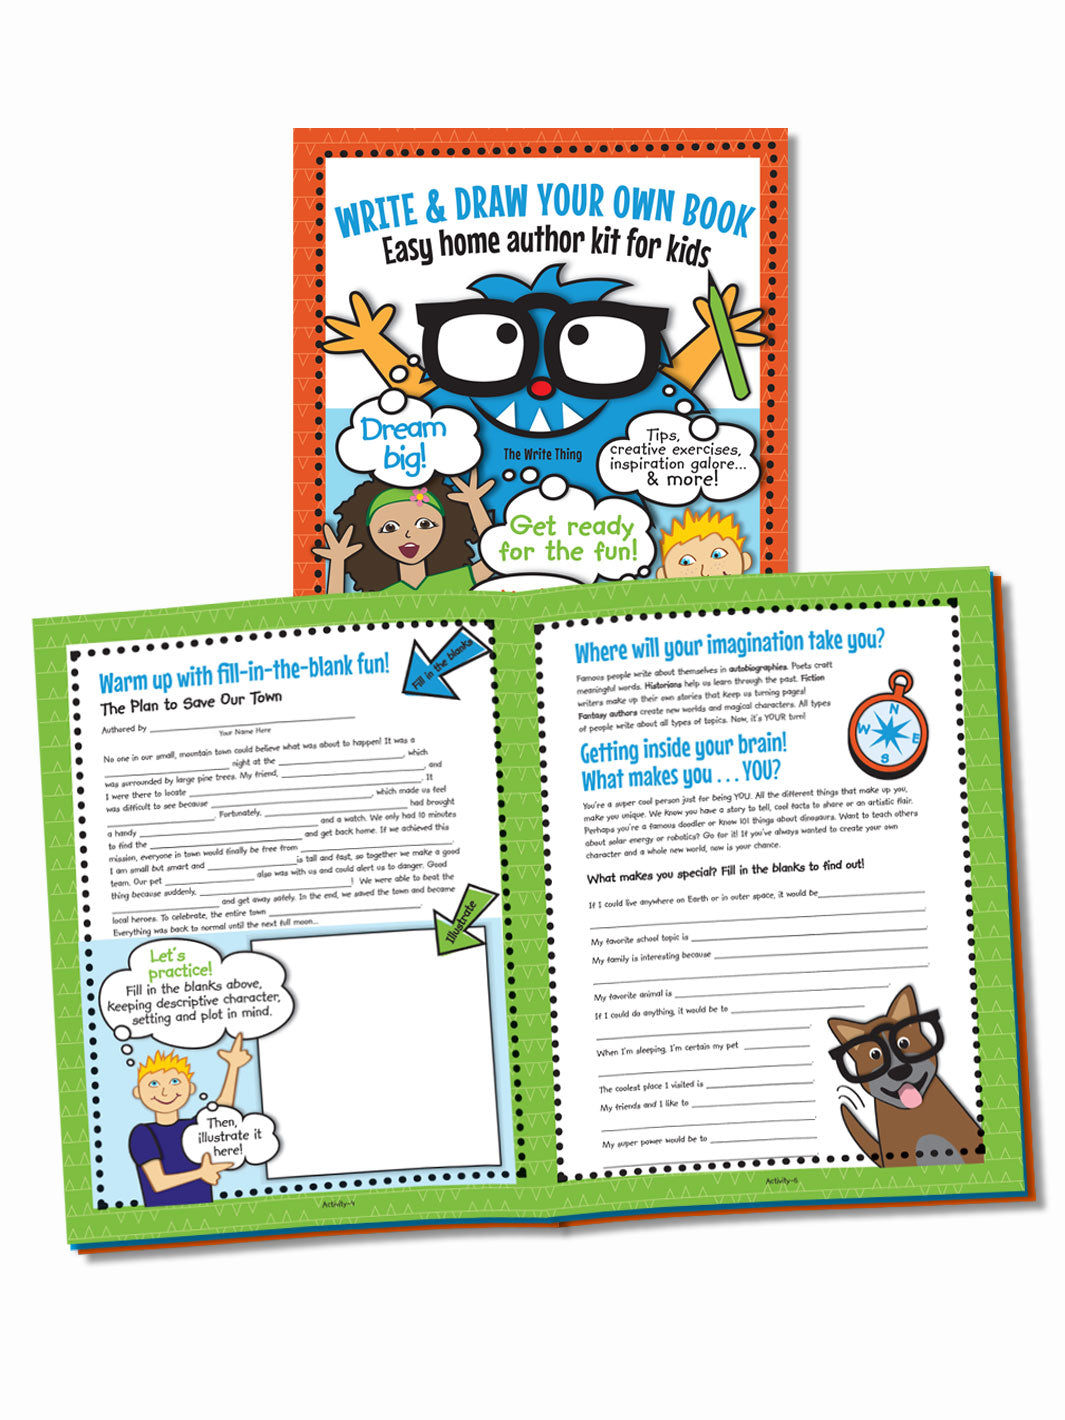 Build A Creative Story Writing Kit for Kids